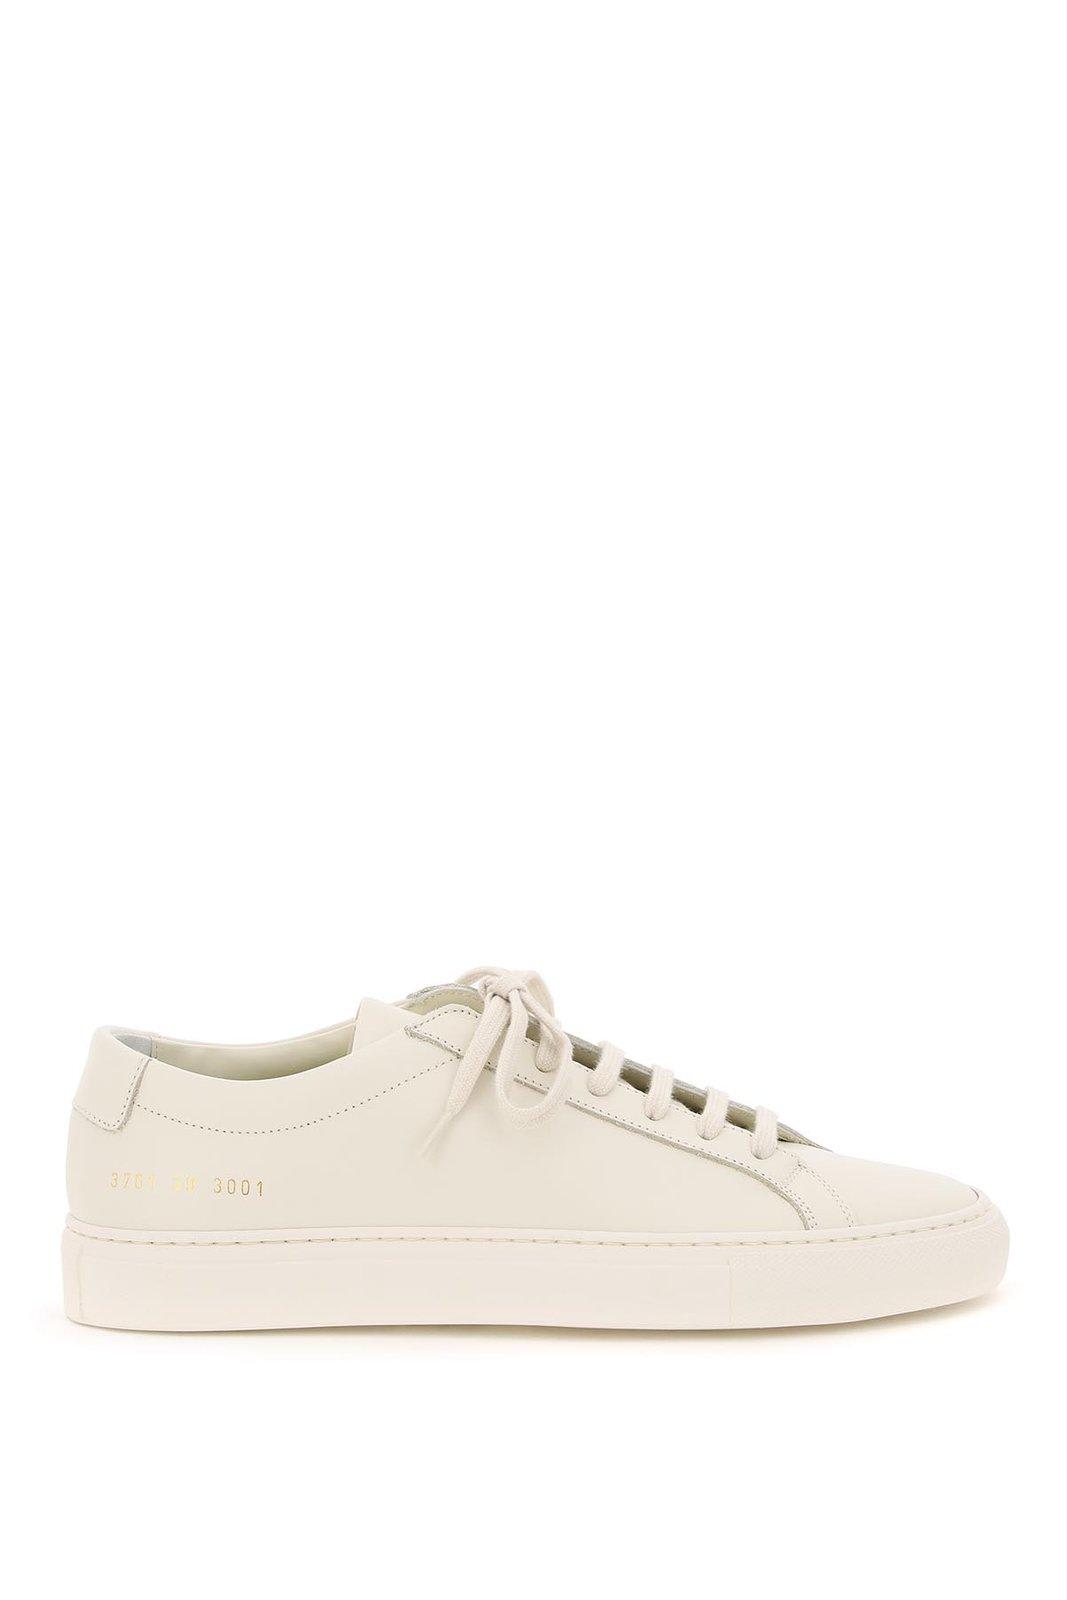 Shop Common Projects Original Achilles Low Sneakers In White